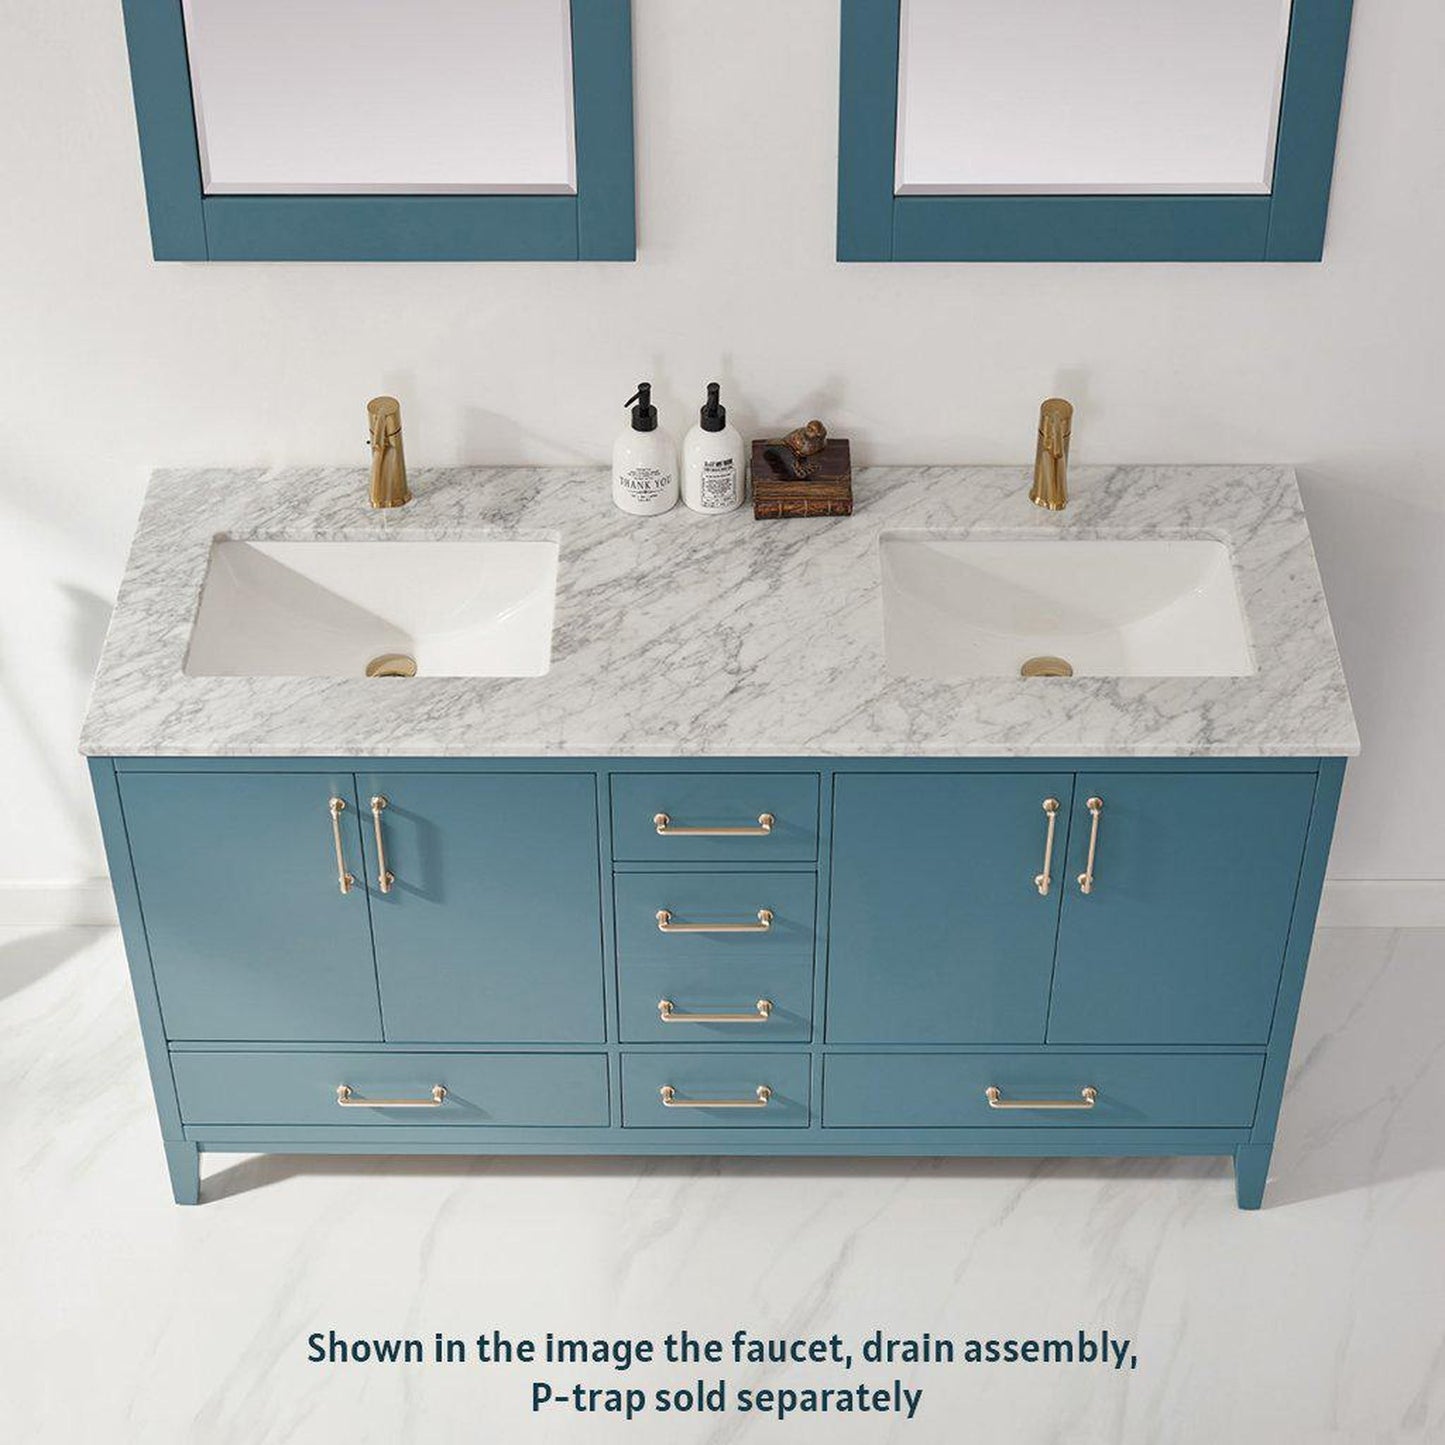 Altair Sutton 60" Double Royal Green Freestanding Bathroom Vanity Set With Mirror, Natural Carrara White Marble Two Rectangular Undermount Ceramic Sinks, and Overflow